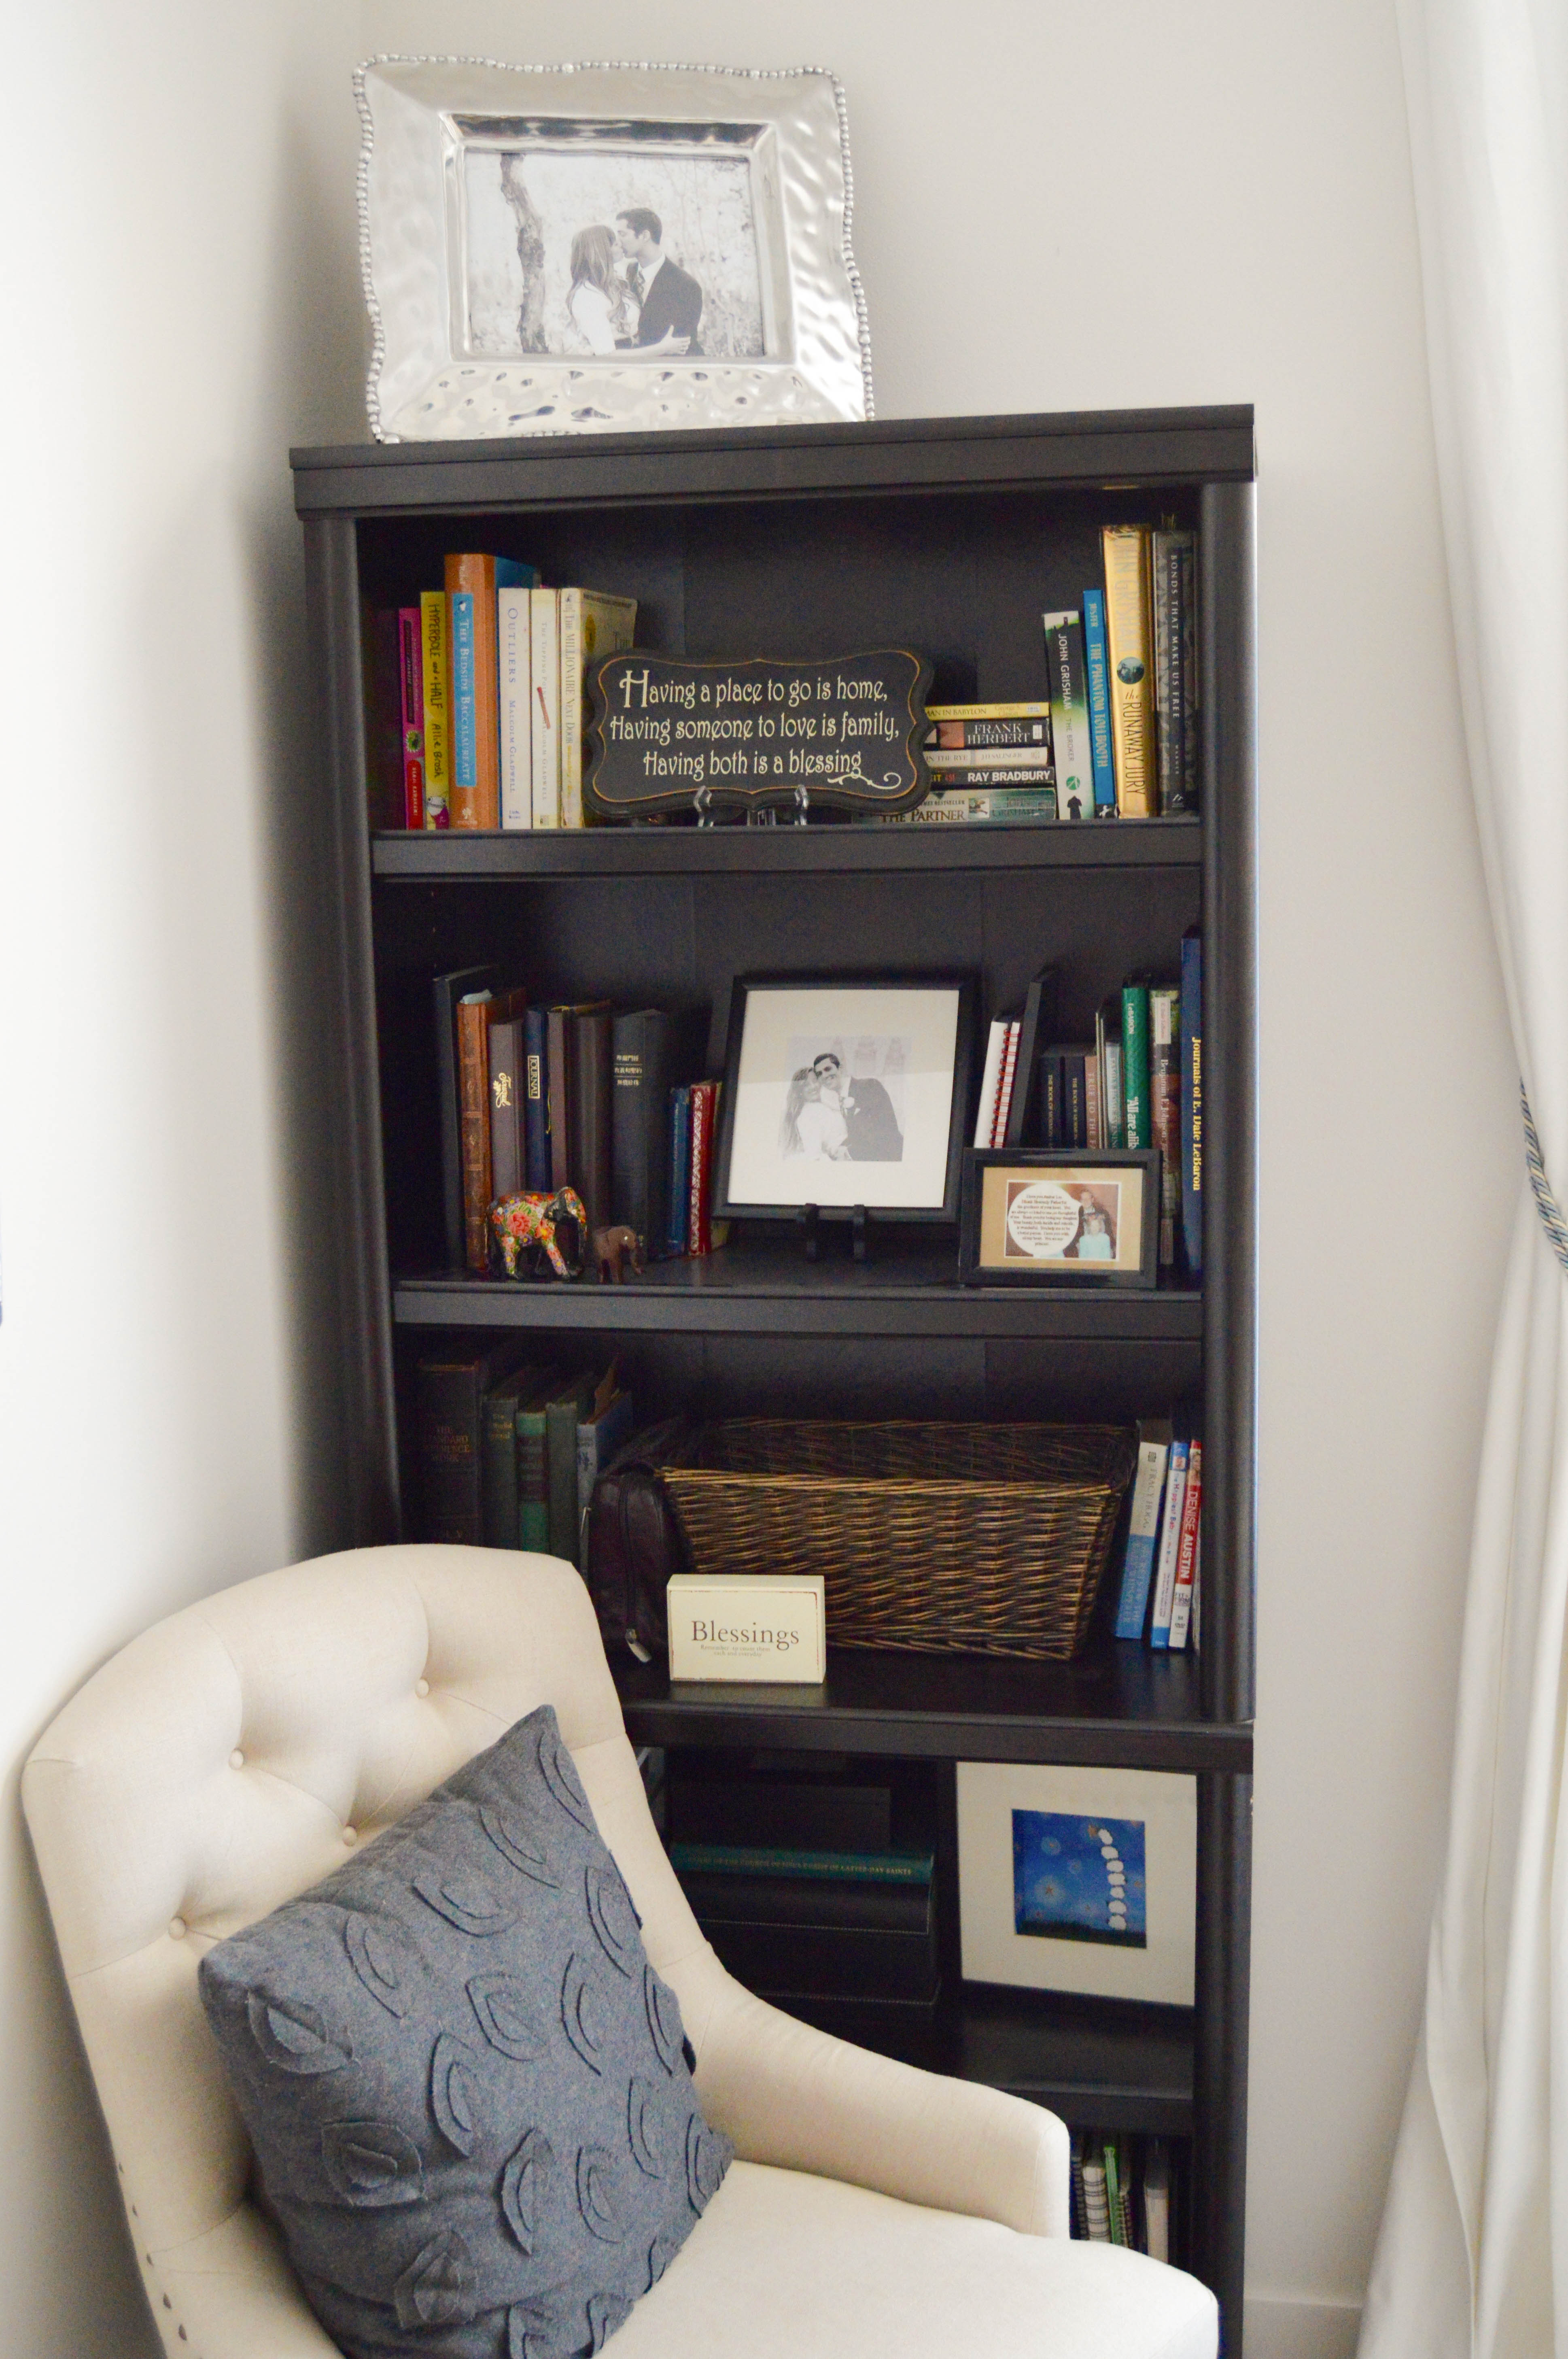 Tips for how to purge and organize your home like a pro. Organizing steps: categorizing and finding homes for things. 5 home organizing rules to live by. Bookcase organizing and arrangement